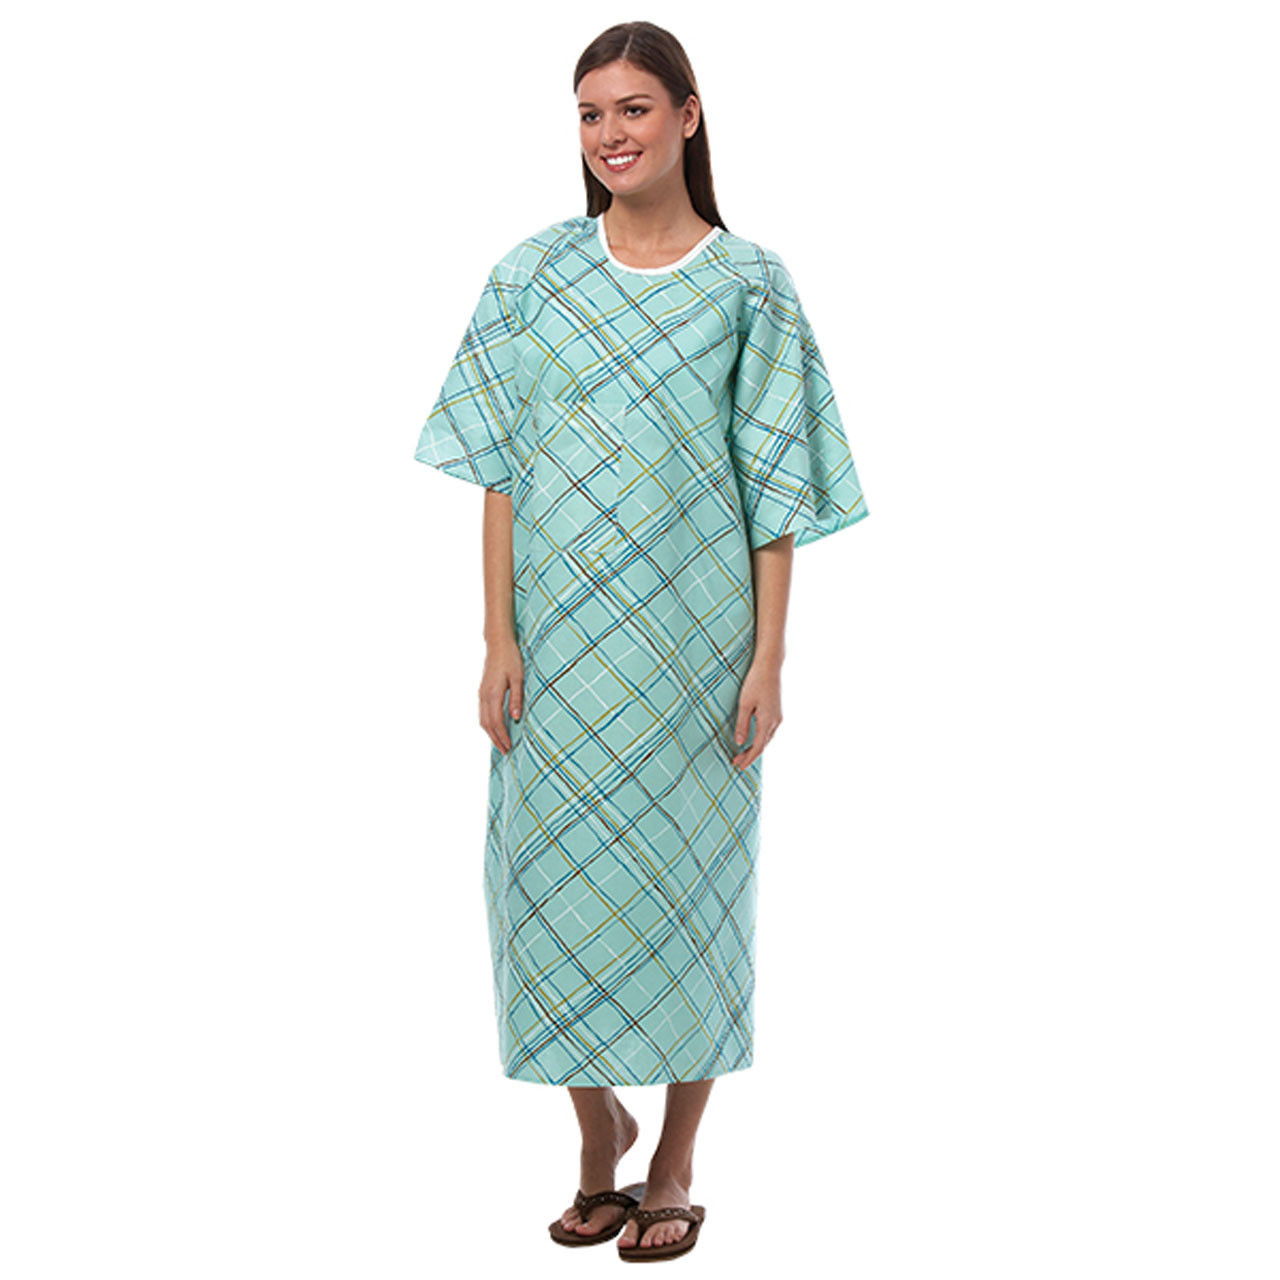 Can I buy these patient gowns in bulk?